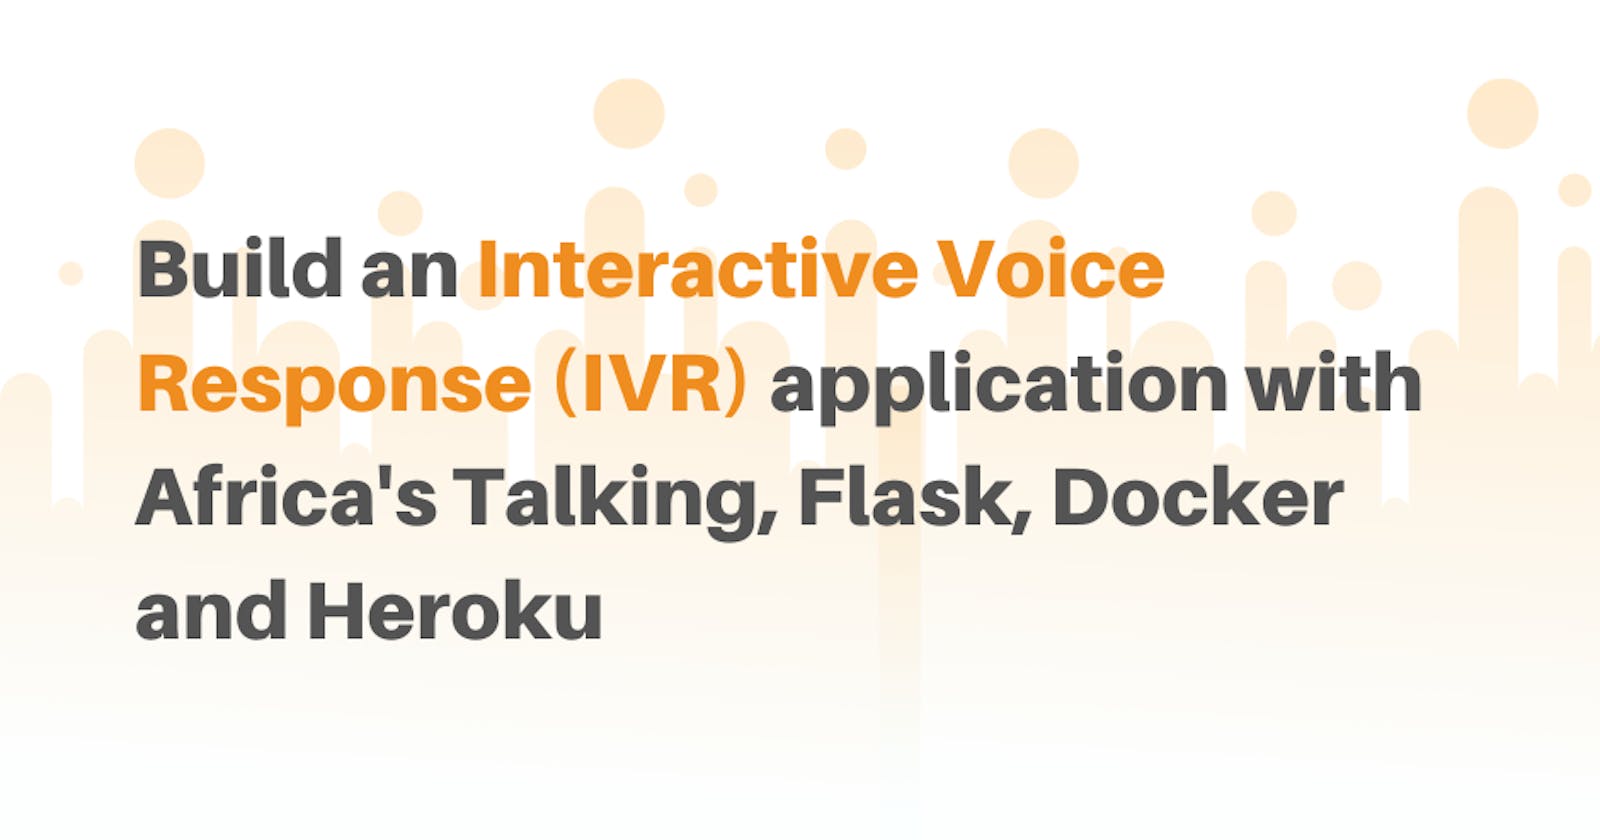 Build an Interactive Voice Response (IVR) application with Africa's Talking, Flask, Docker and Heroku